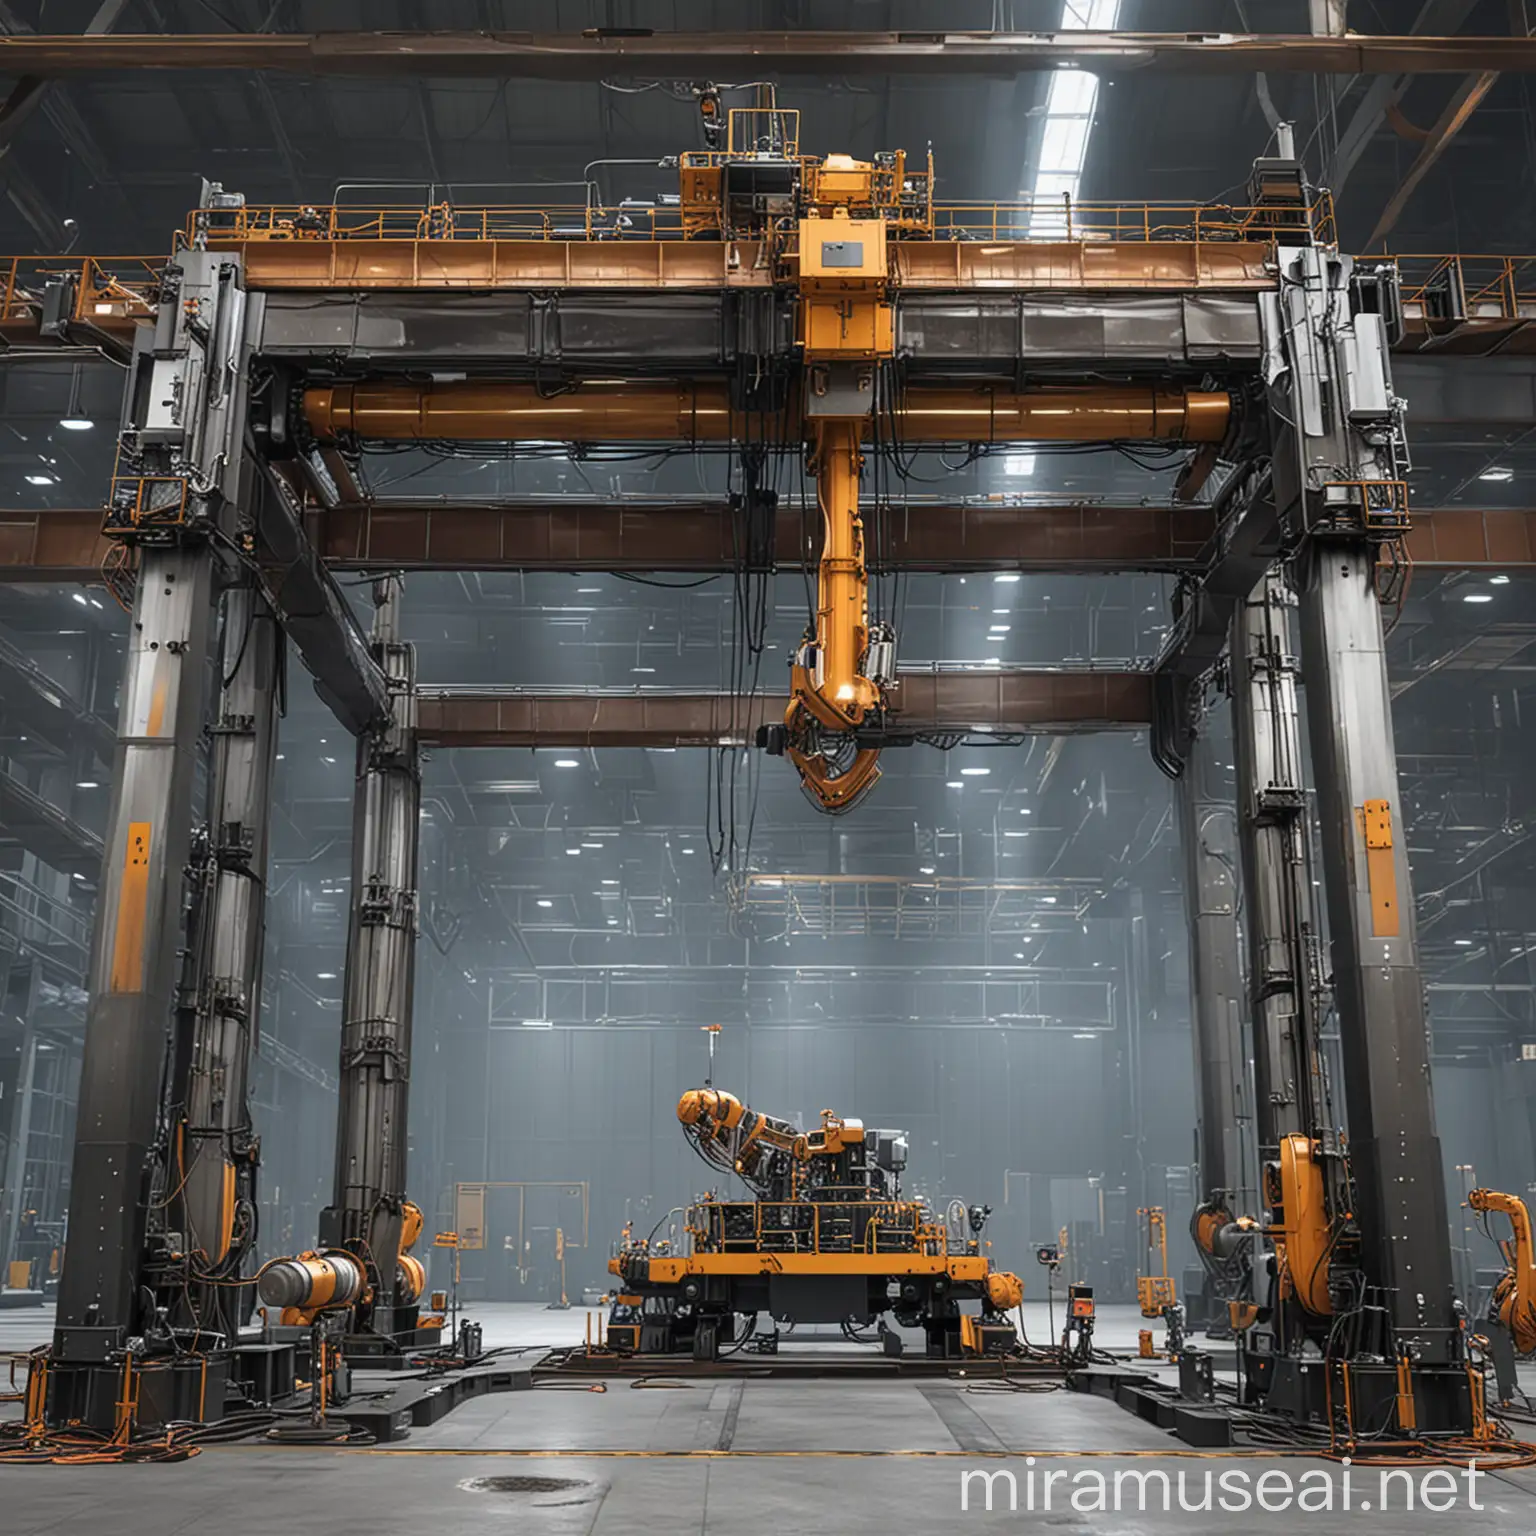 concept of a gantry based welding station for robotic welding of heavy and large power plant reactor components